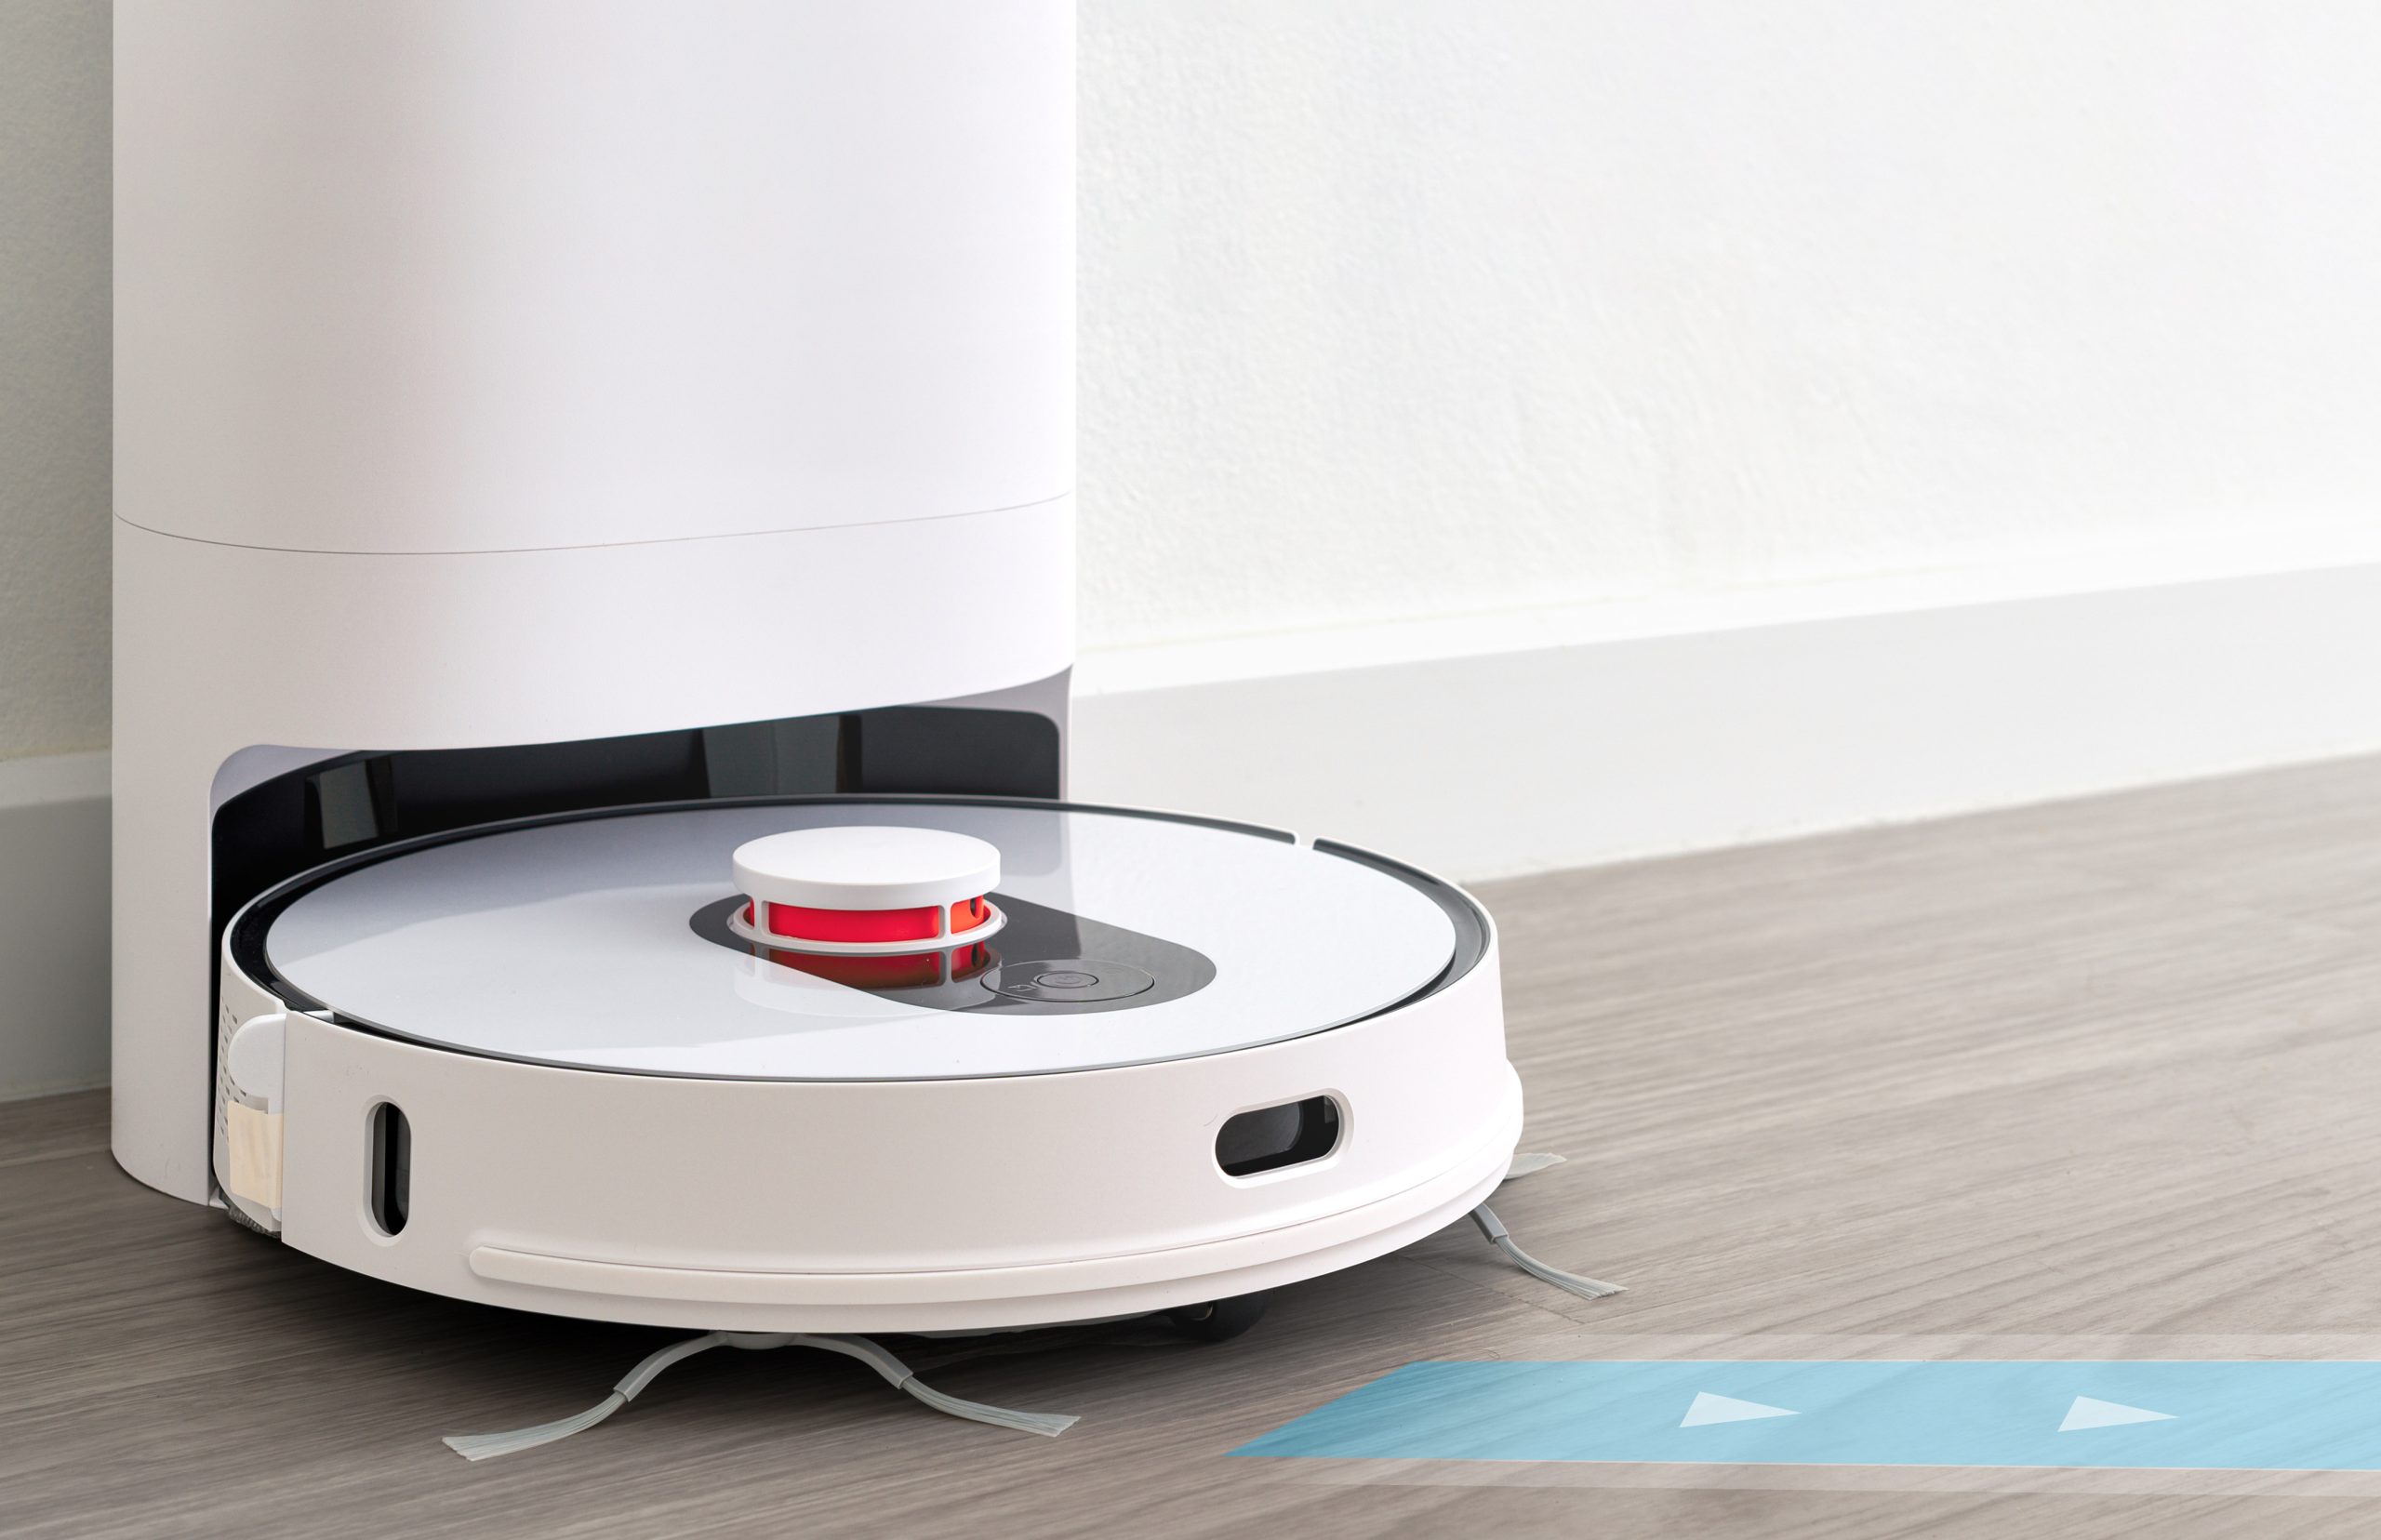 Meet Aritra- An Autonomous Mobile Robot (AMR) with Accurate Indoor Positioning and Navigation